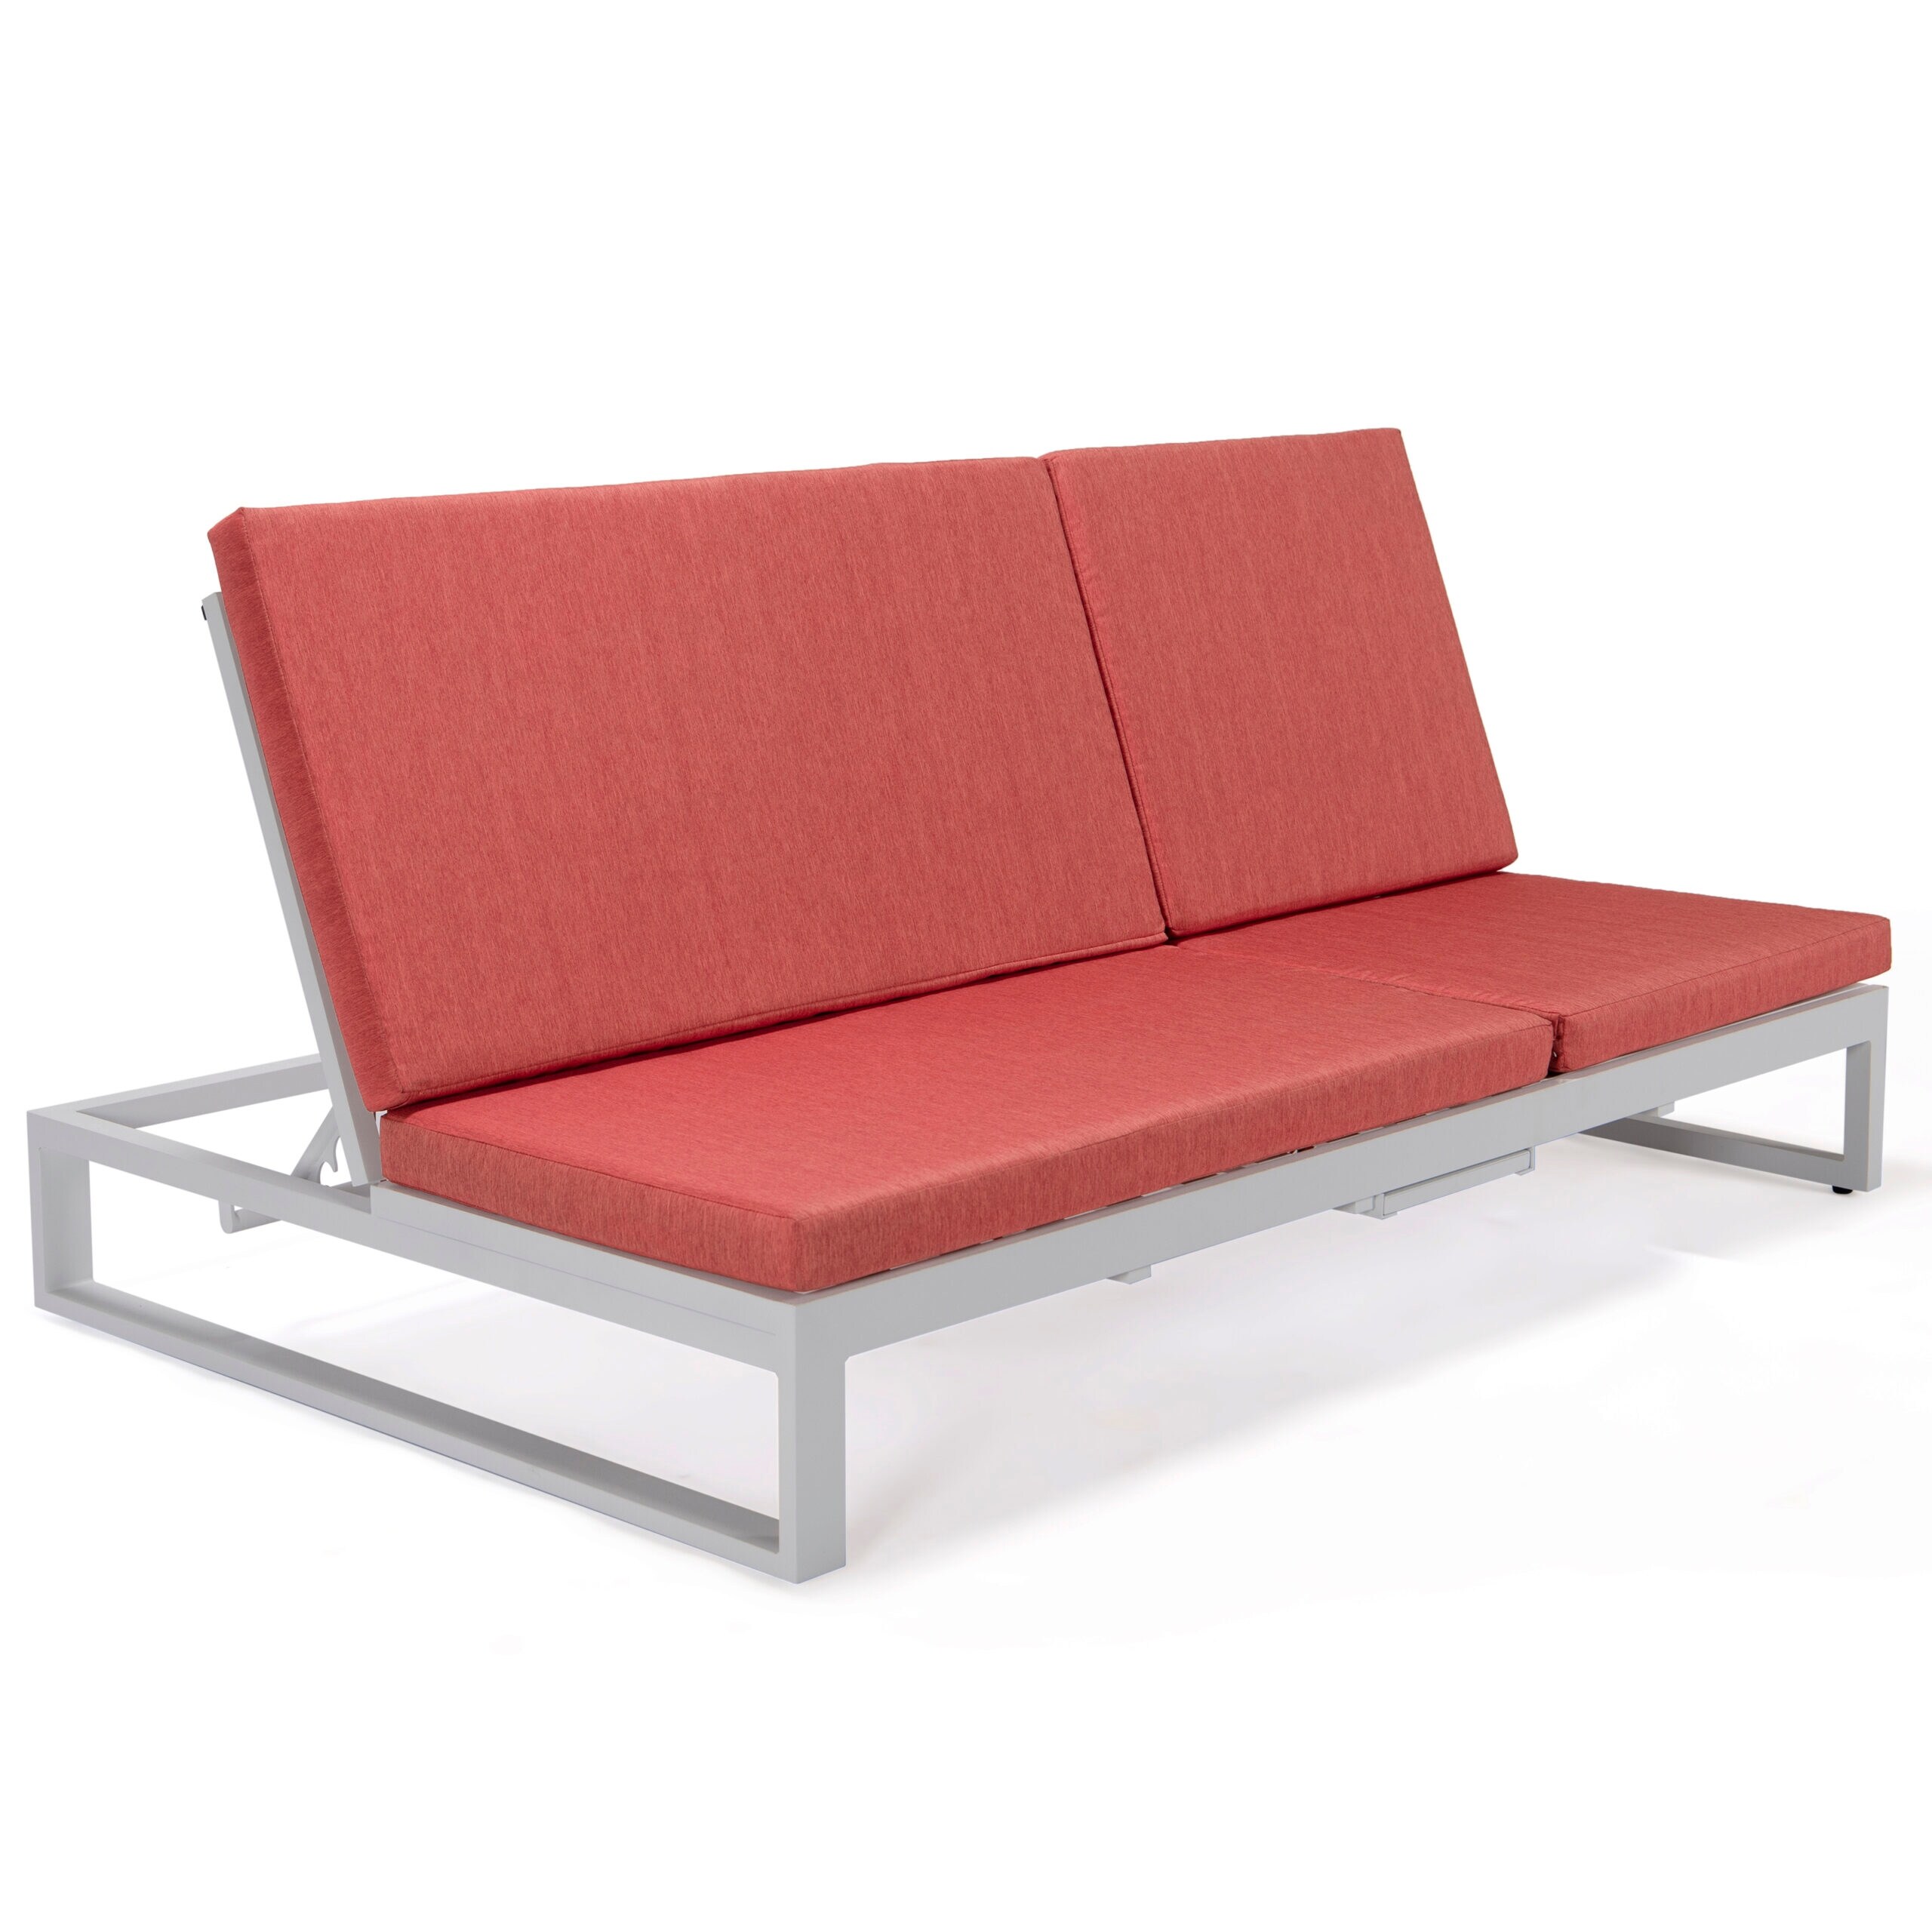 Leisuremod Chelsea Patio 2 In 1 Convertible Sofa Double Chaise Lounge